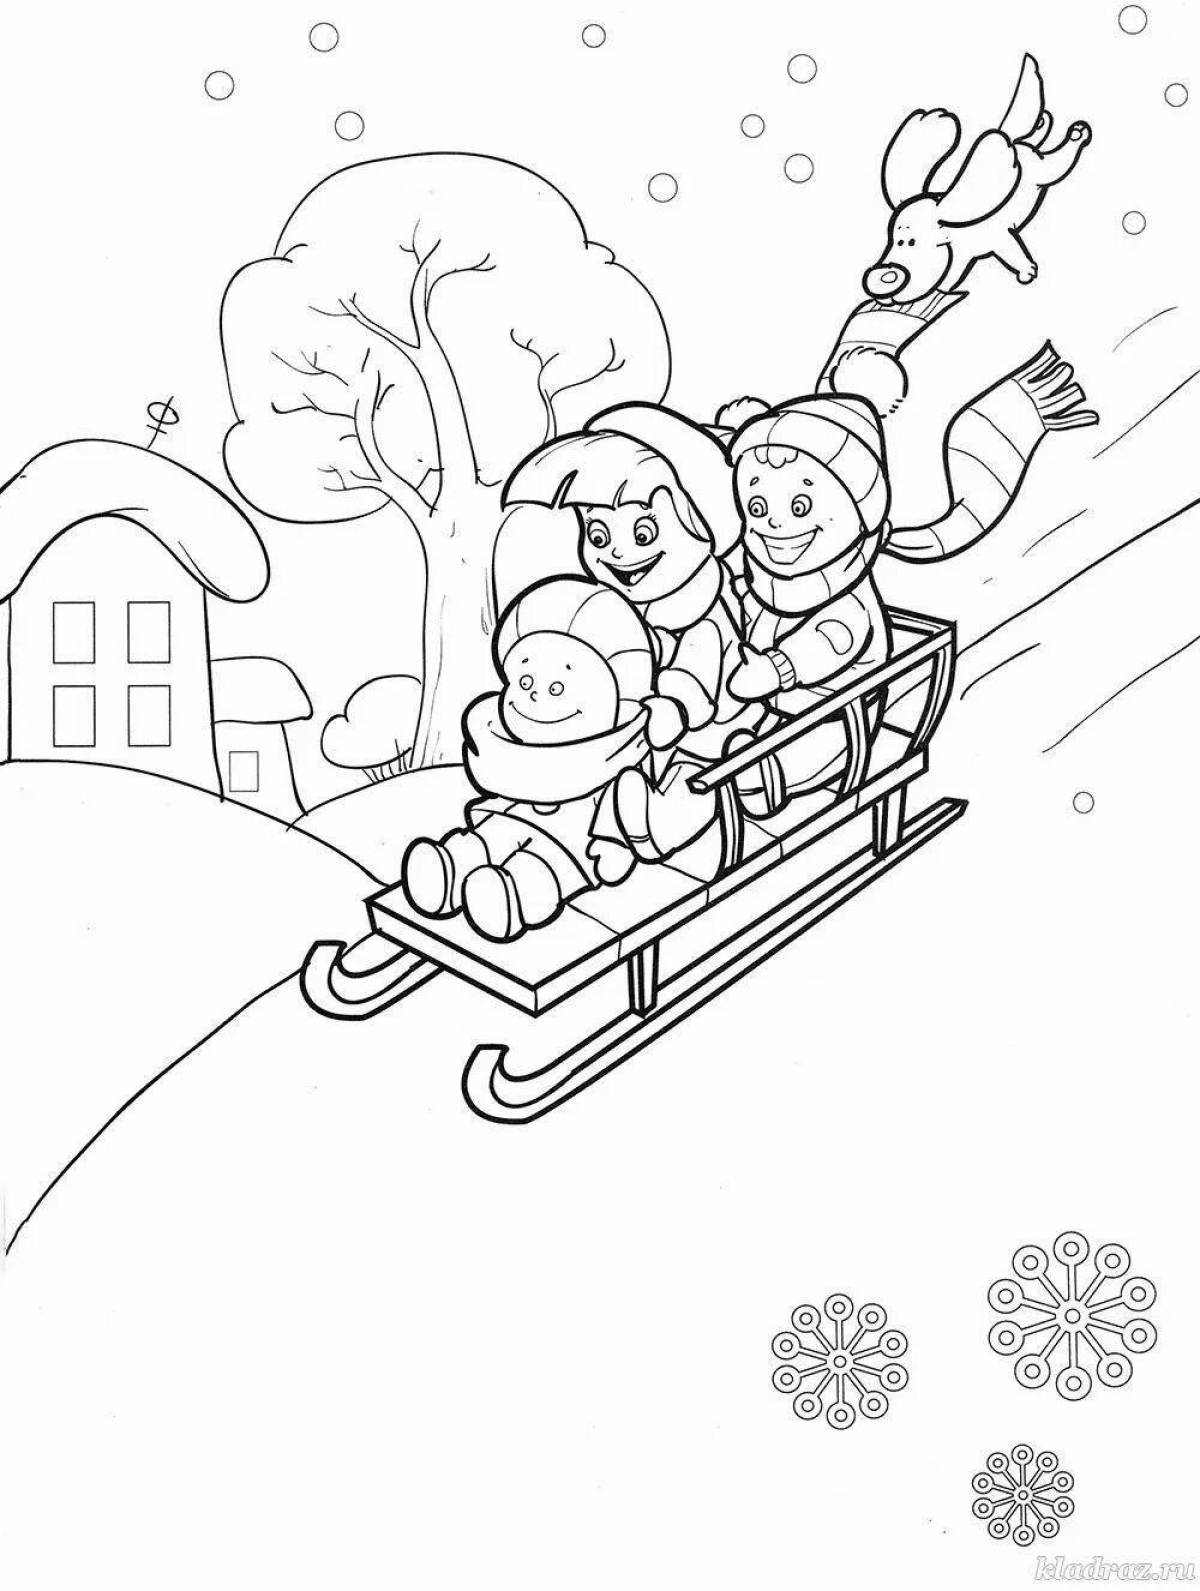 Inspirational winter coloring book for 5 year olds